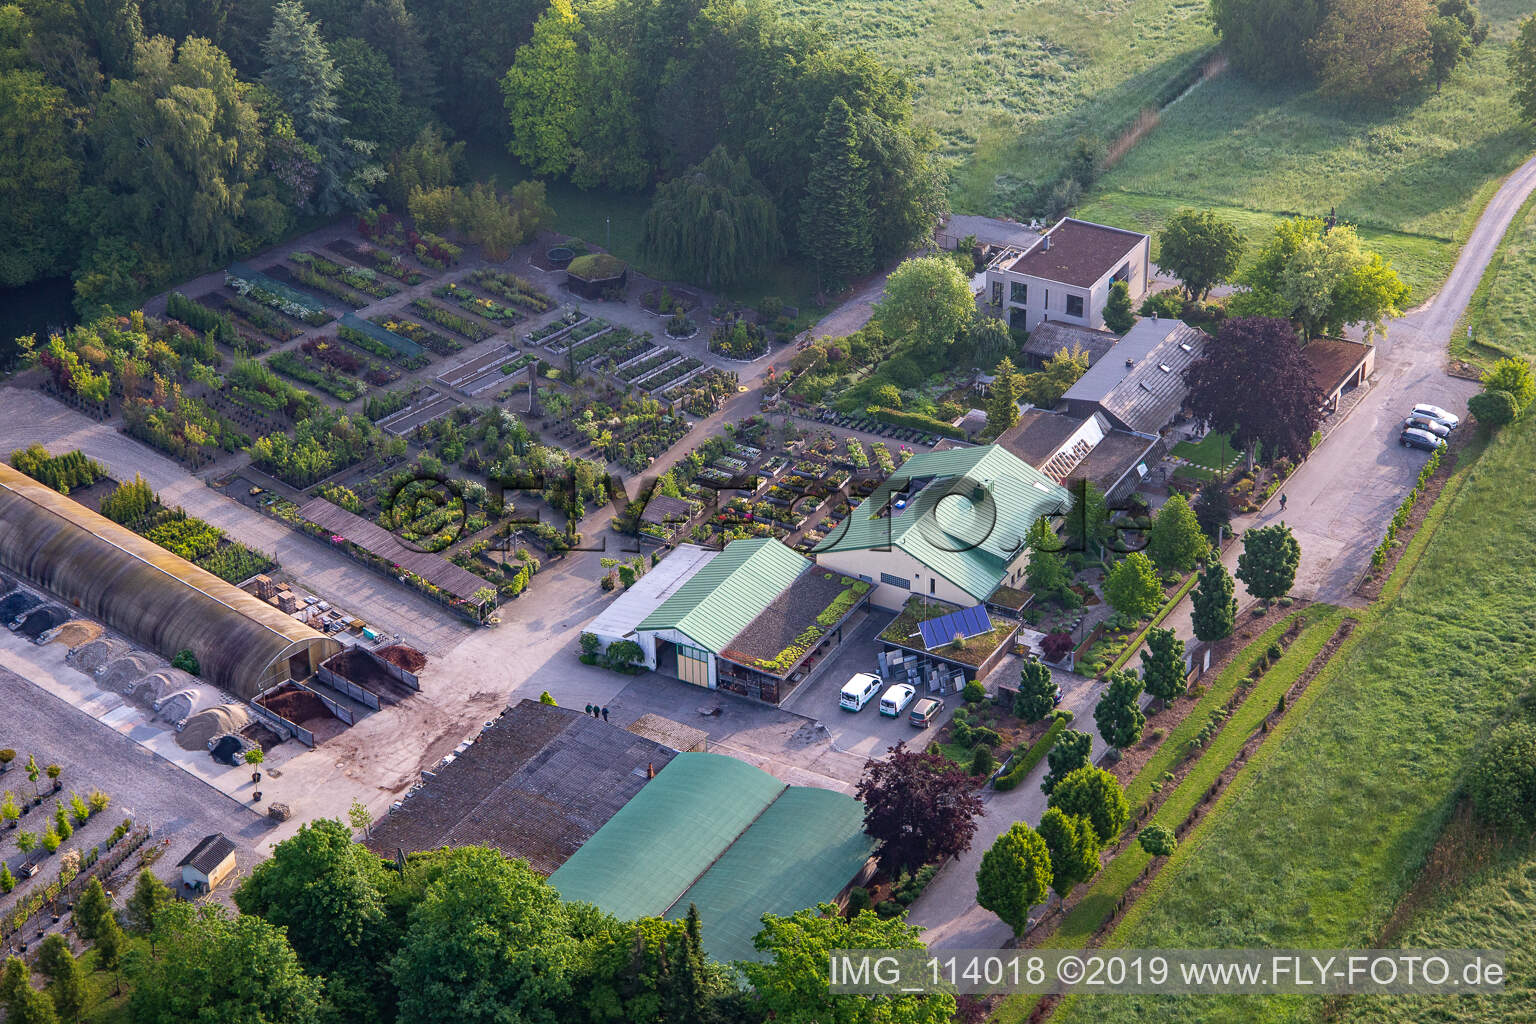 Bienwald tree nursery / Greentec in Berg in the state Rhineland-Palatinate, Germany from the plane